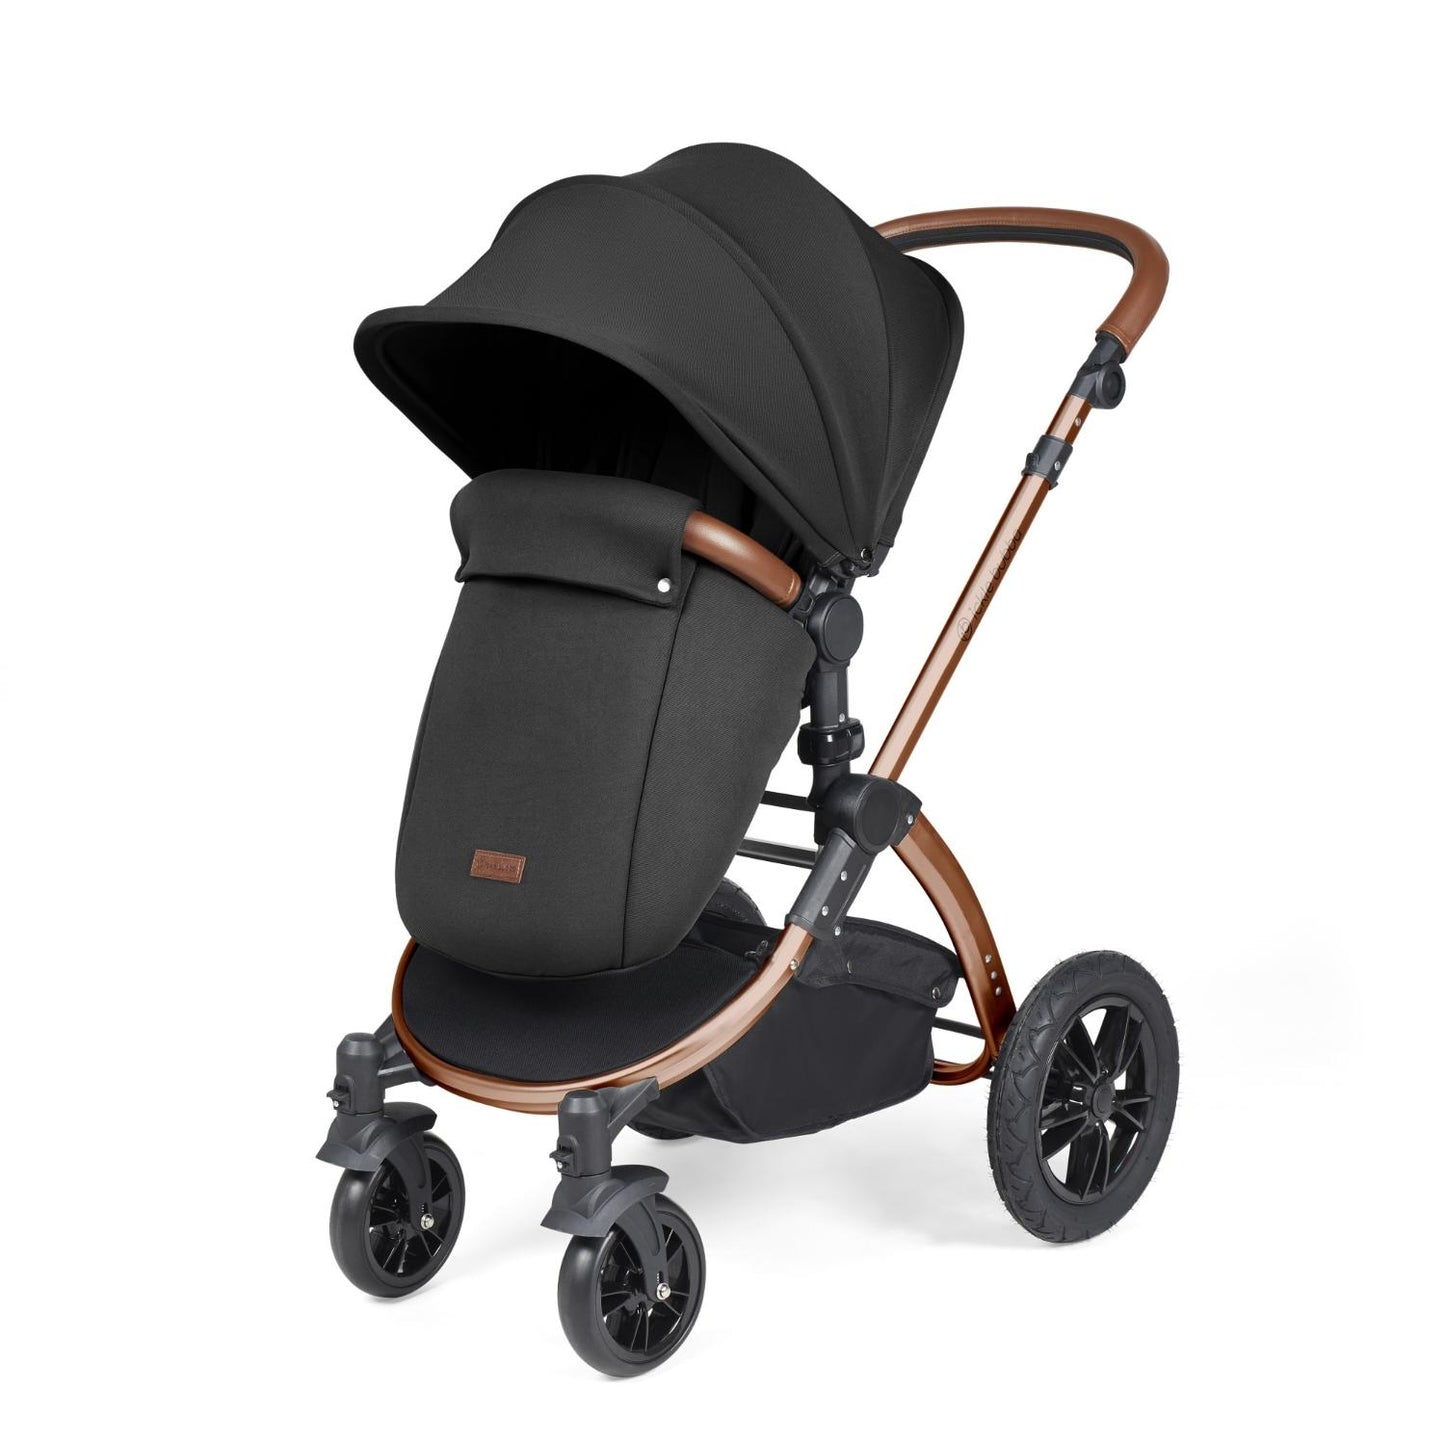 Ickle Bubba Stomp Luxe Pushchair with foot warmer attached in Midnight black colour with bronze chassis and tan handle